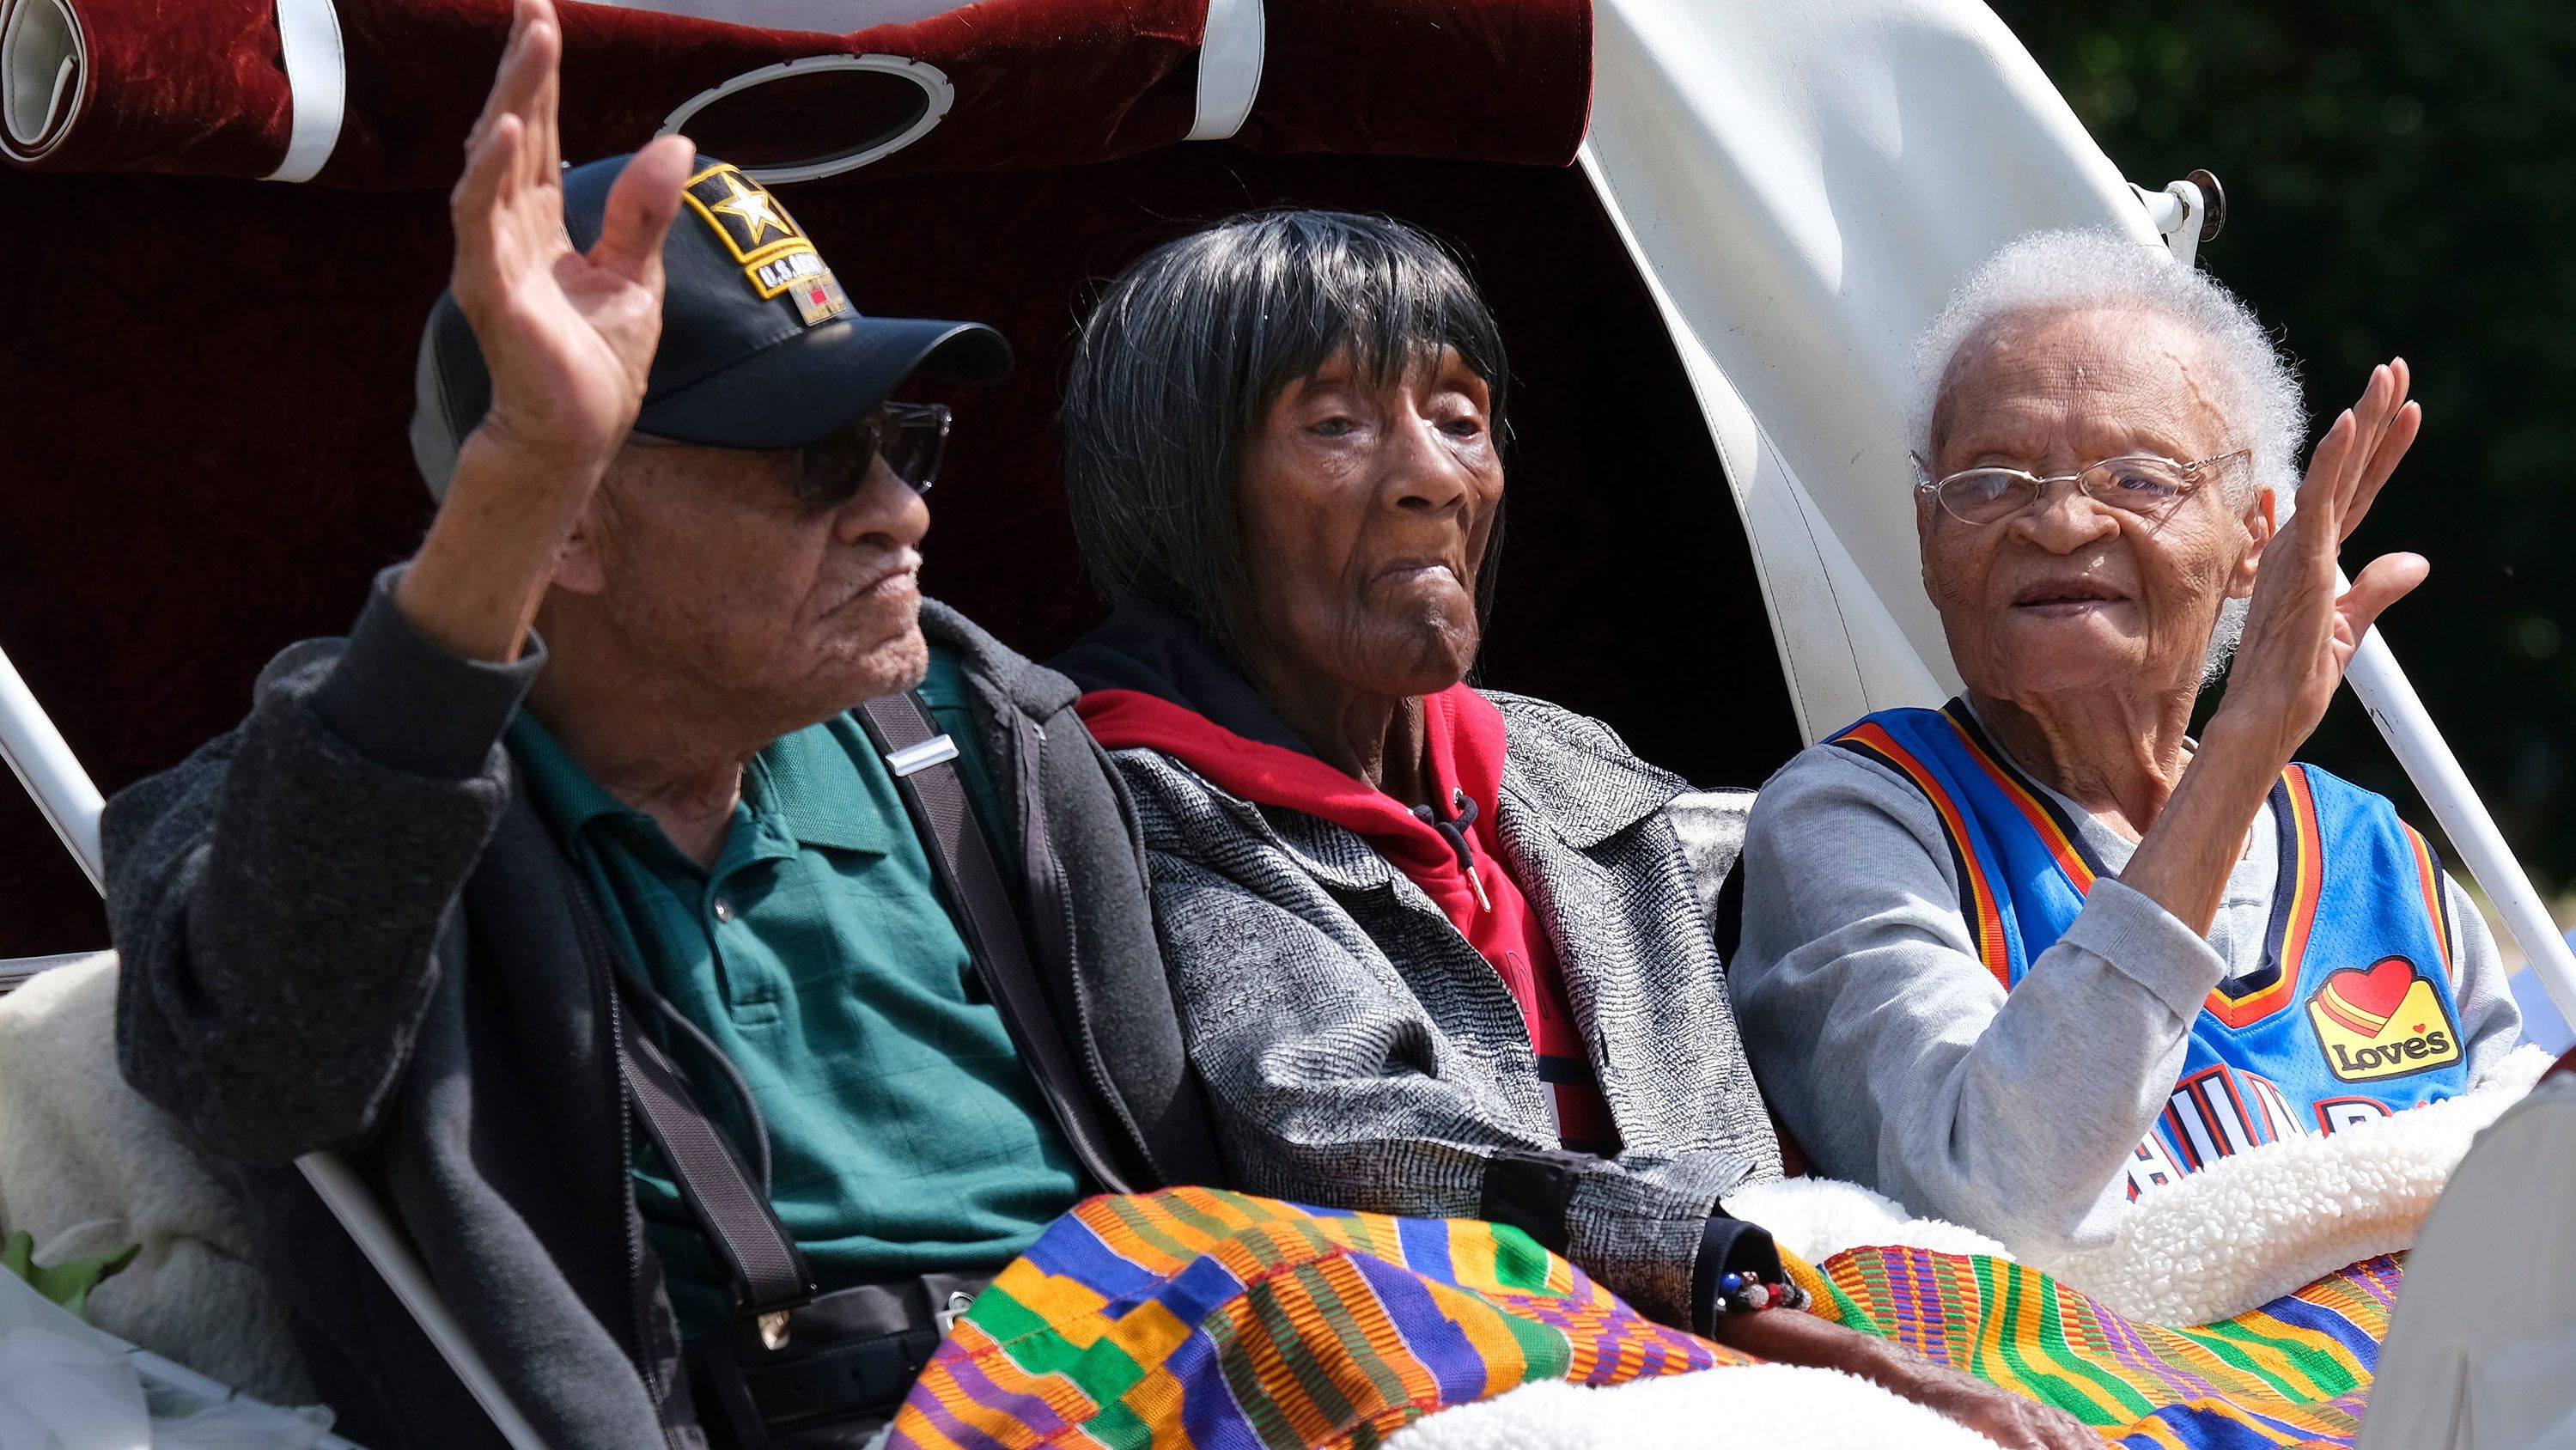 Tulsa race massacre survivors, Hughes Van Ellis, Lessie Randle and Viola Fletcher ride in a carriage at the front of the Black Wall St. Memorial on March 28, 2021.